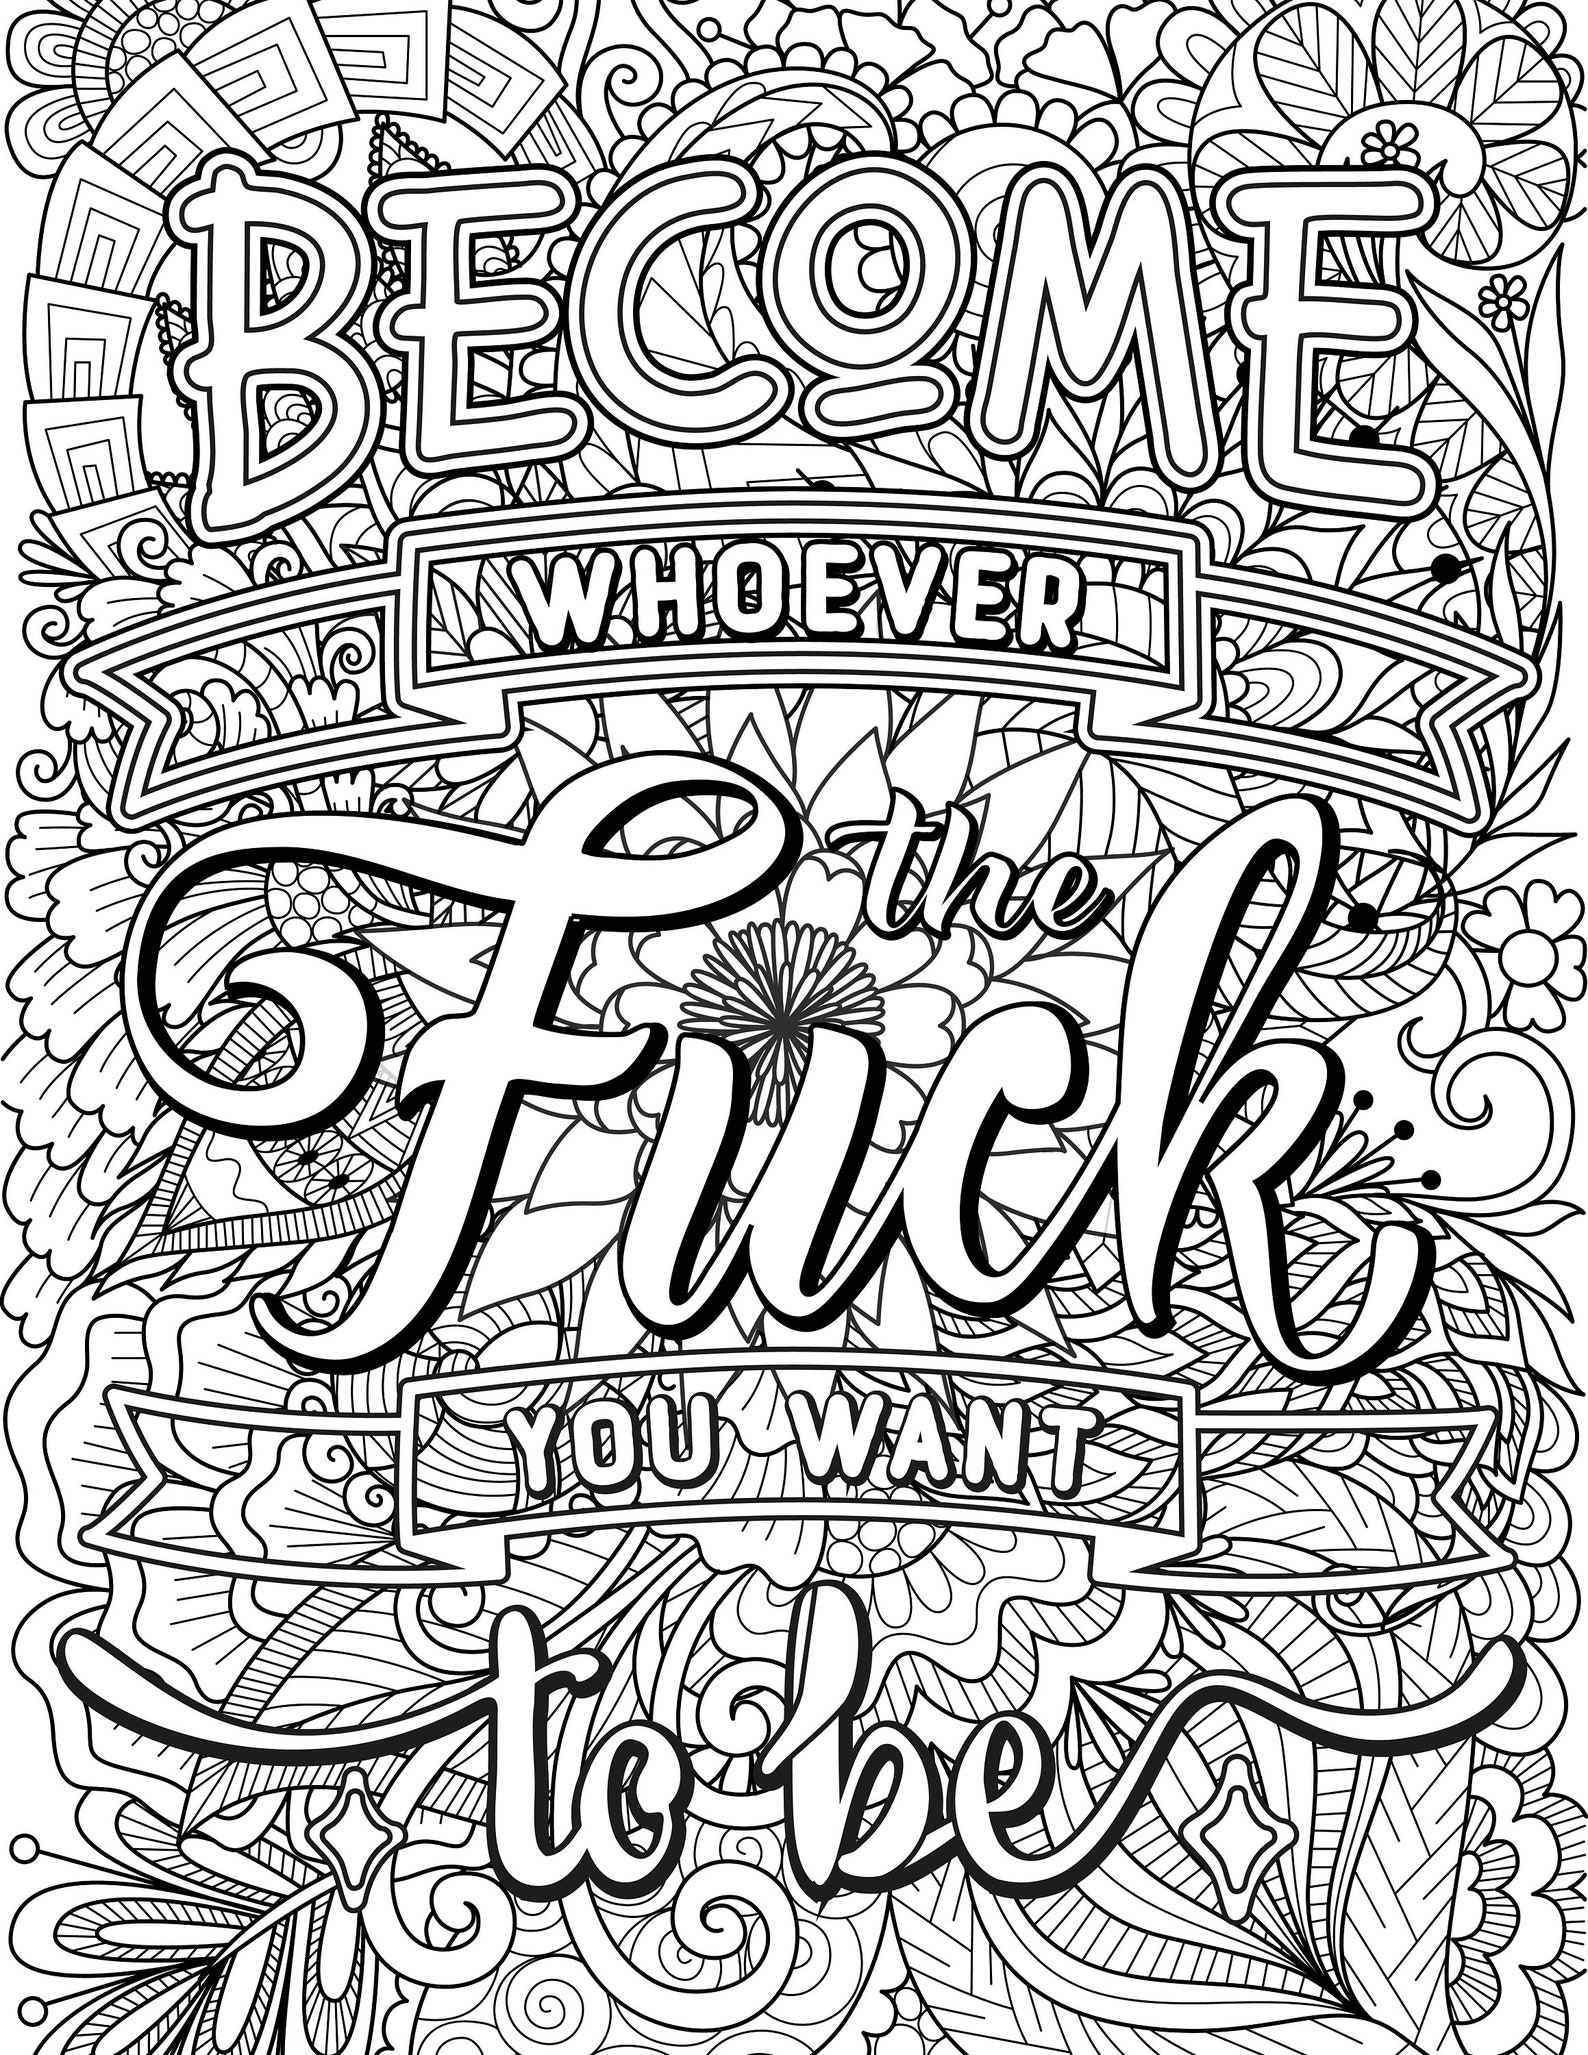 Funny Adult Coloring Page | Etsy